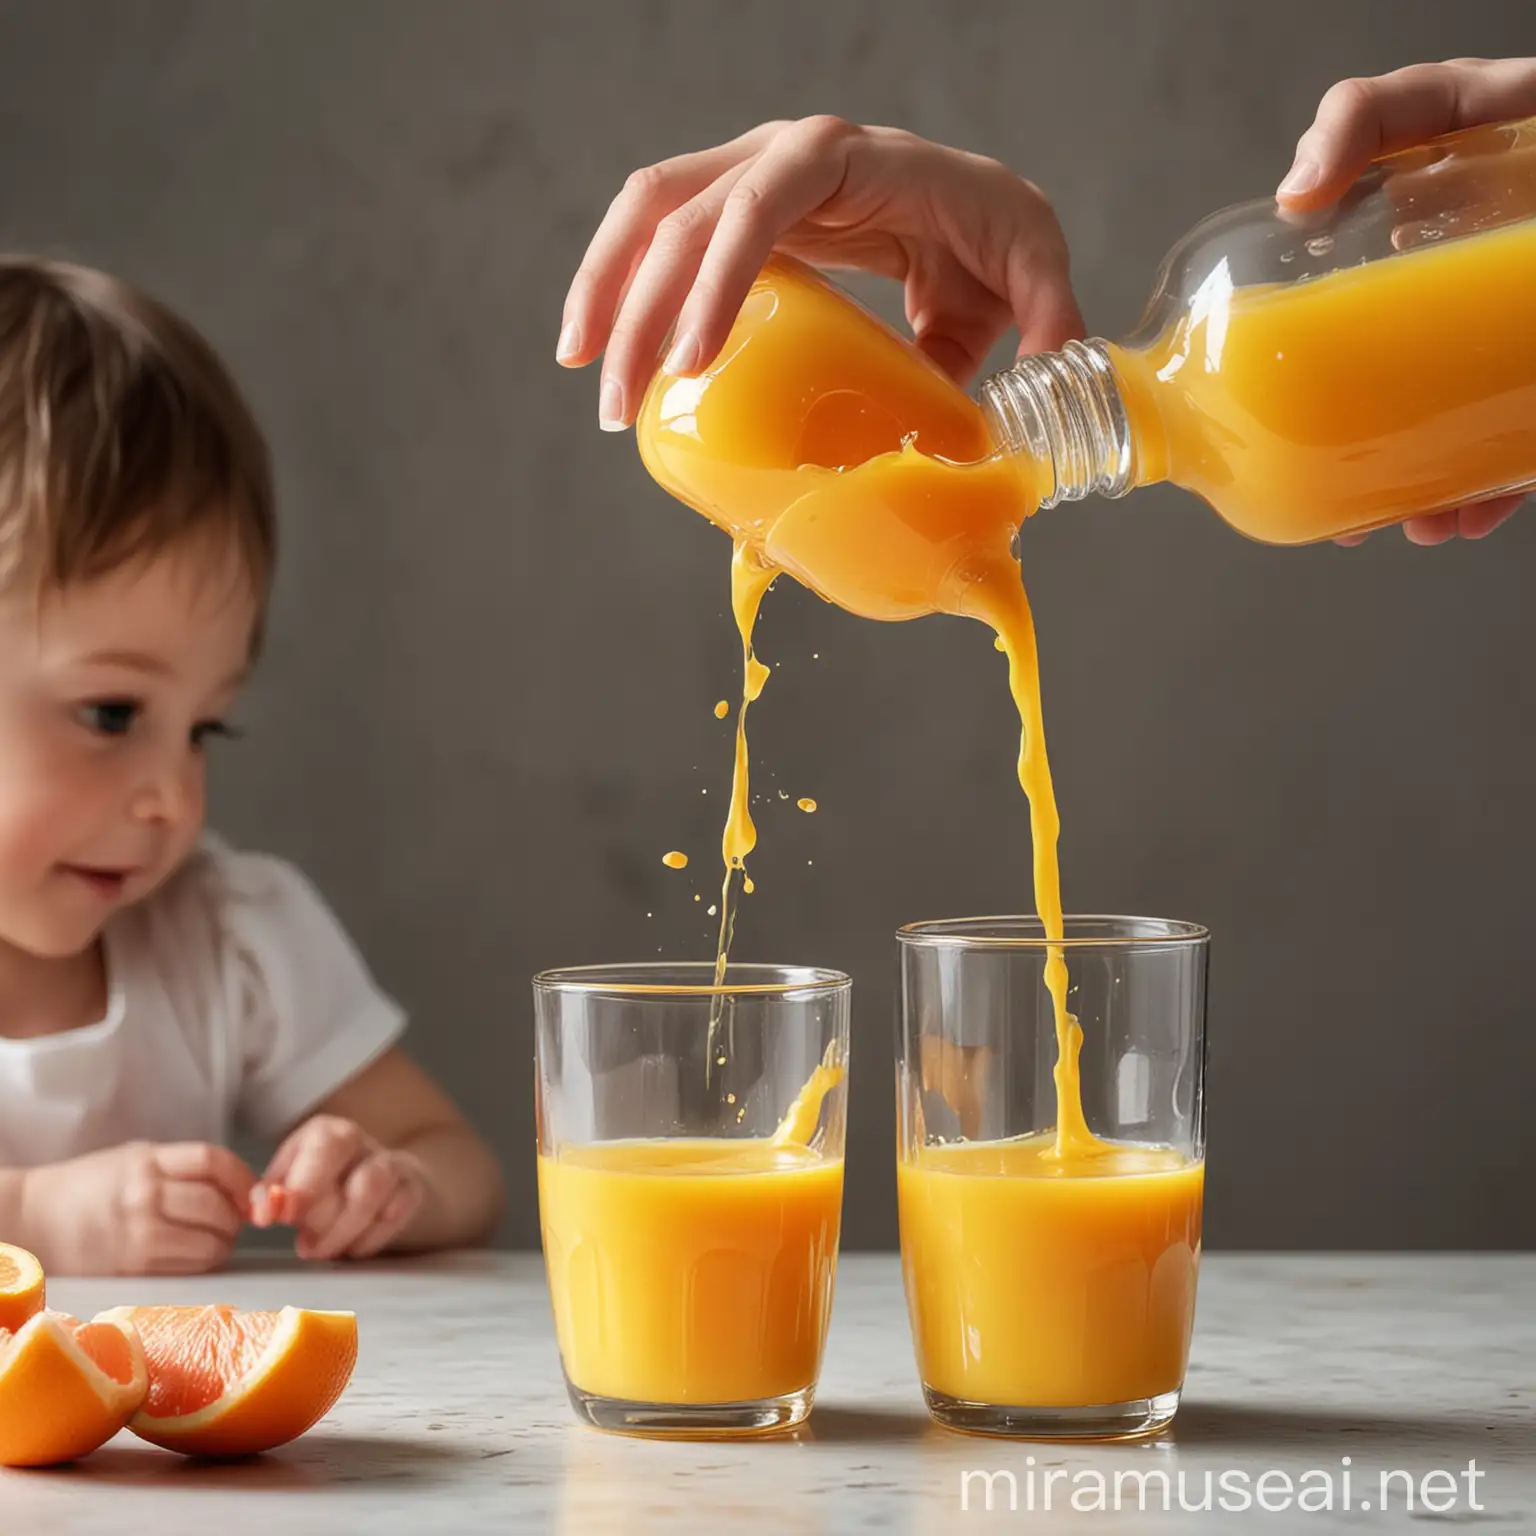 create a close up image for a mother hand holding bottle and pouring juice from bottle into a glass that the child holds